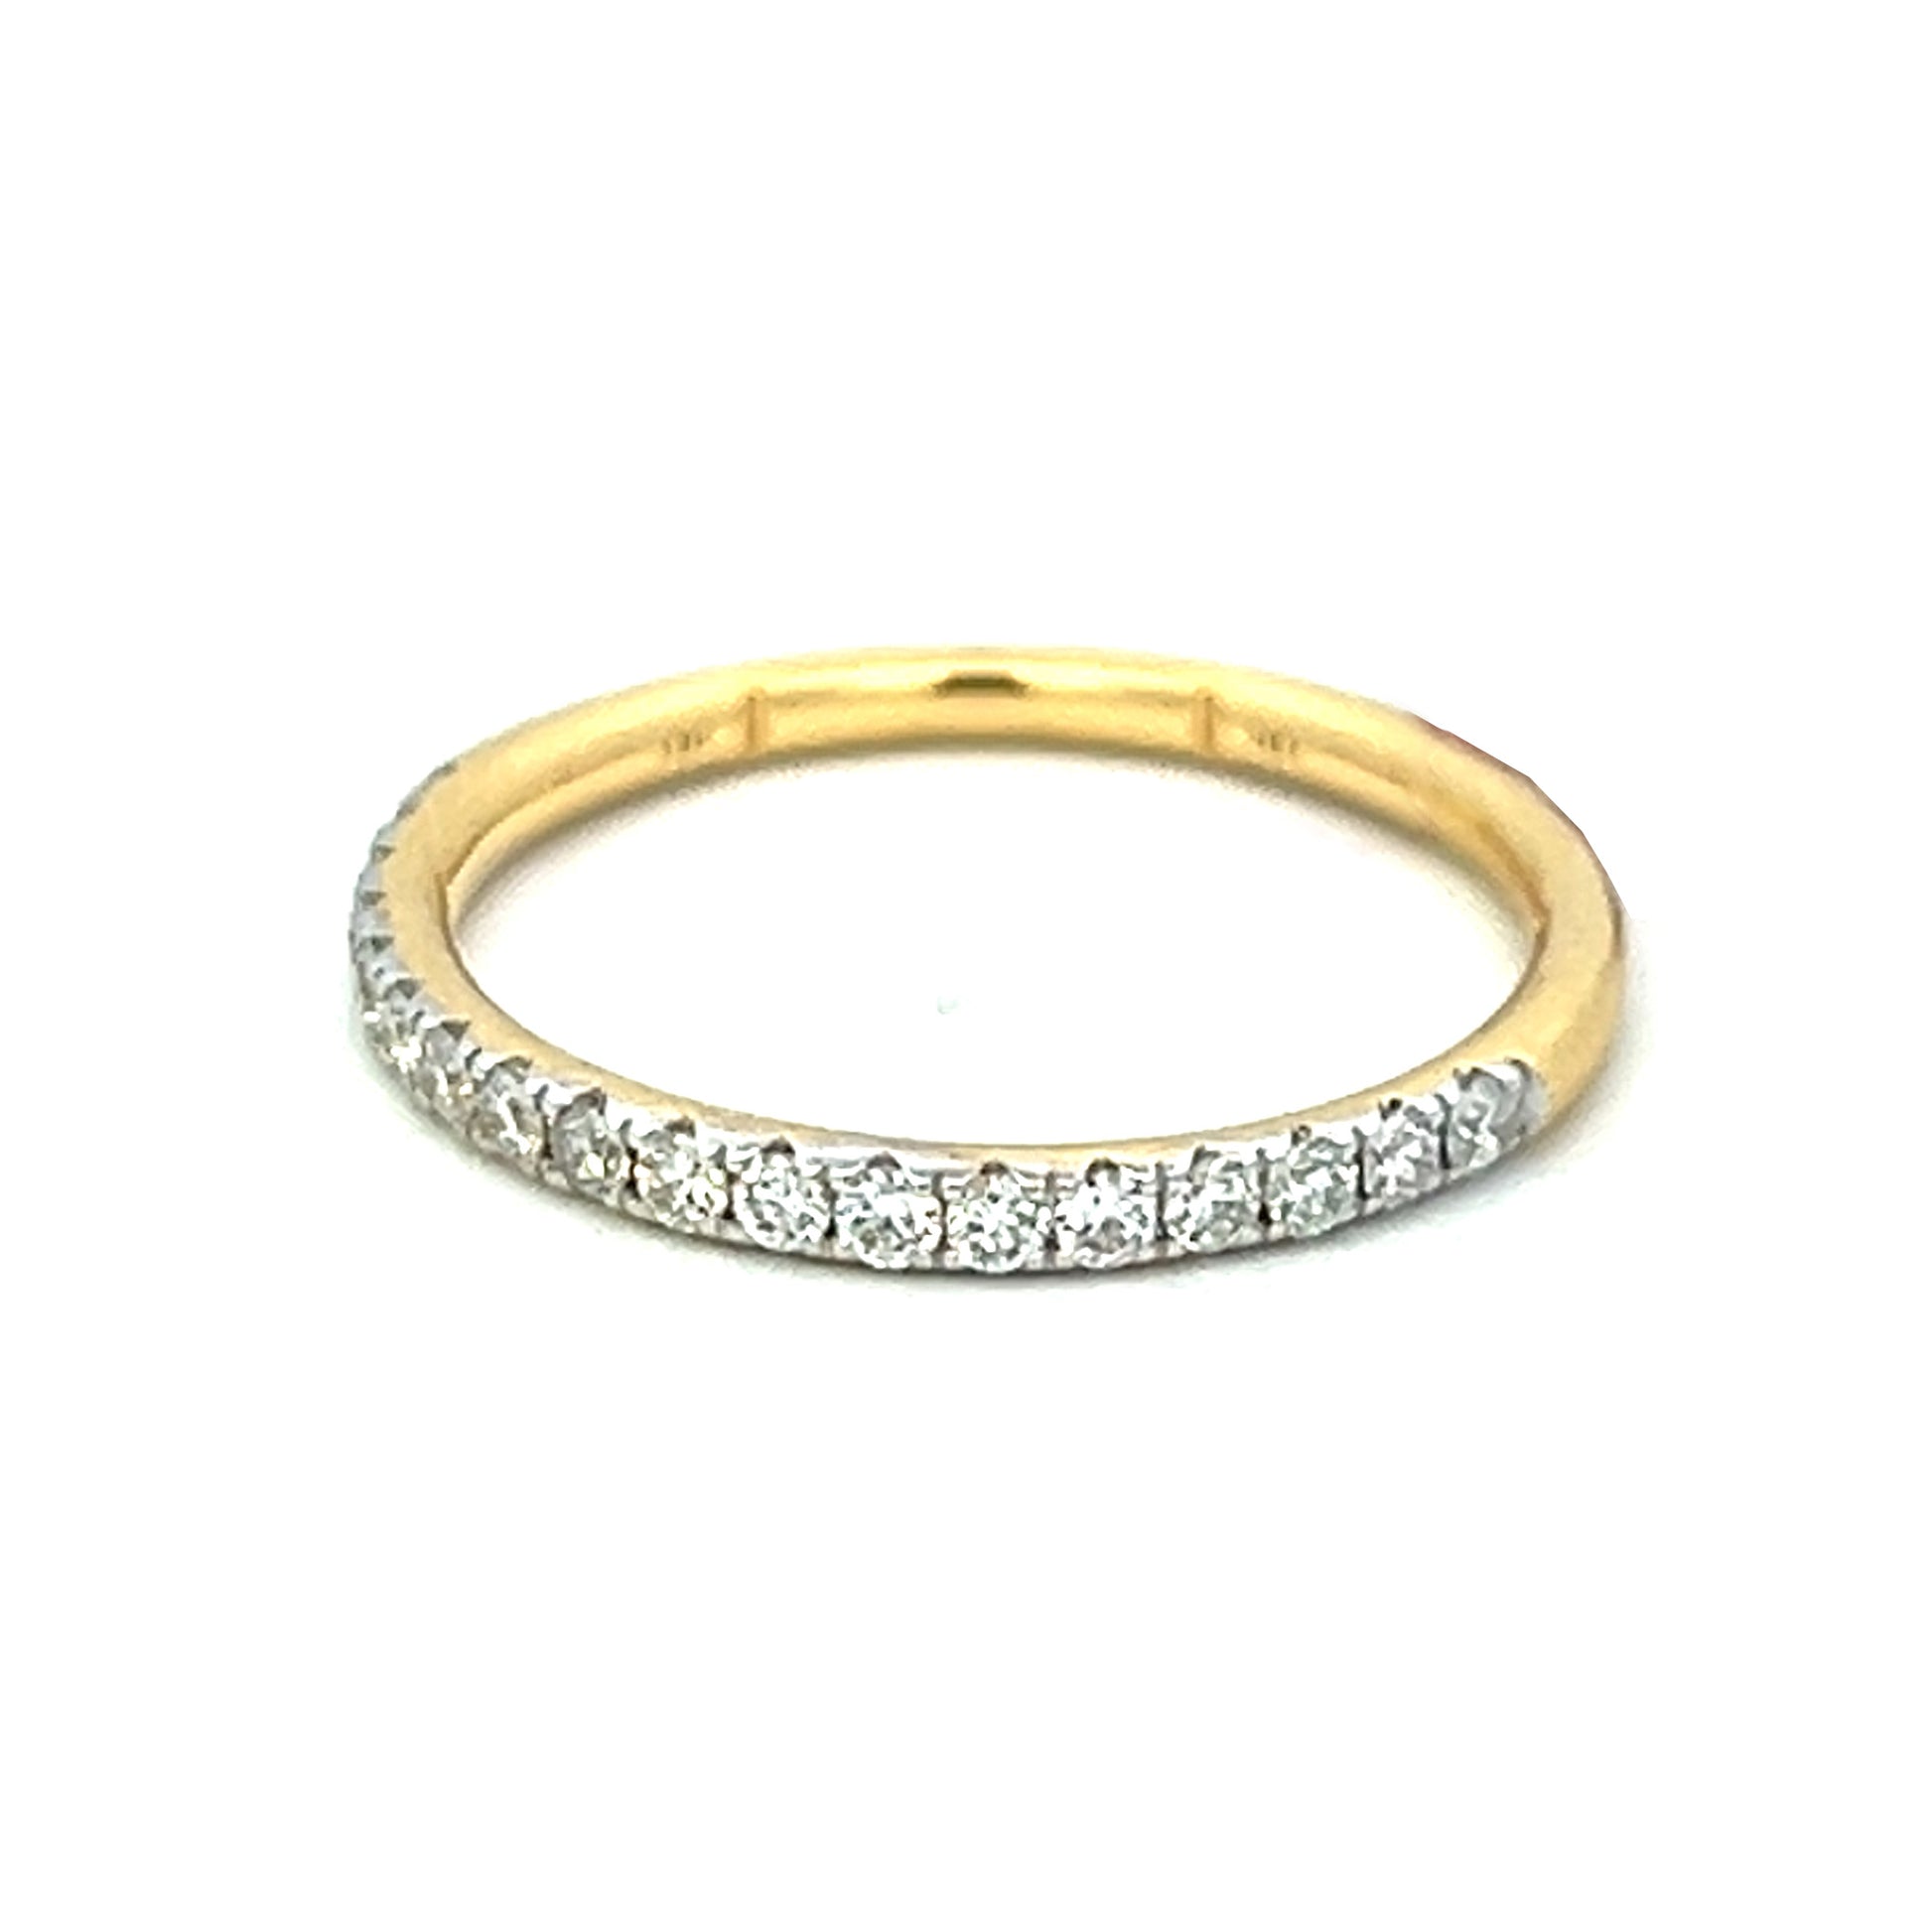 .32cttw Eternity Wedding Band | 14k Yellow Gold | Ring With Diamonds All Around